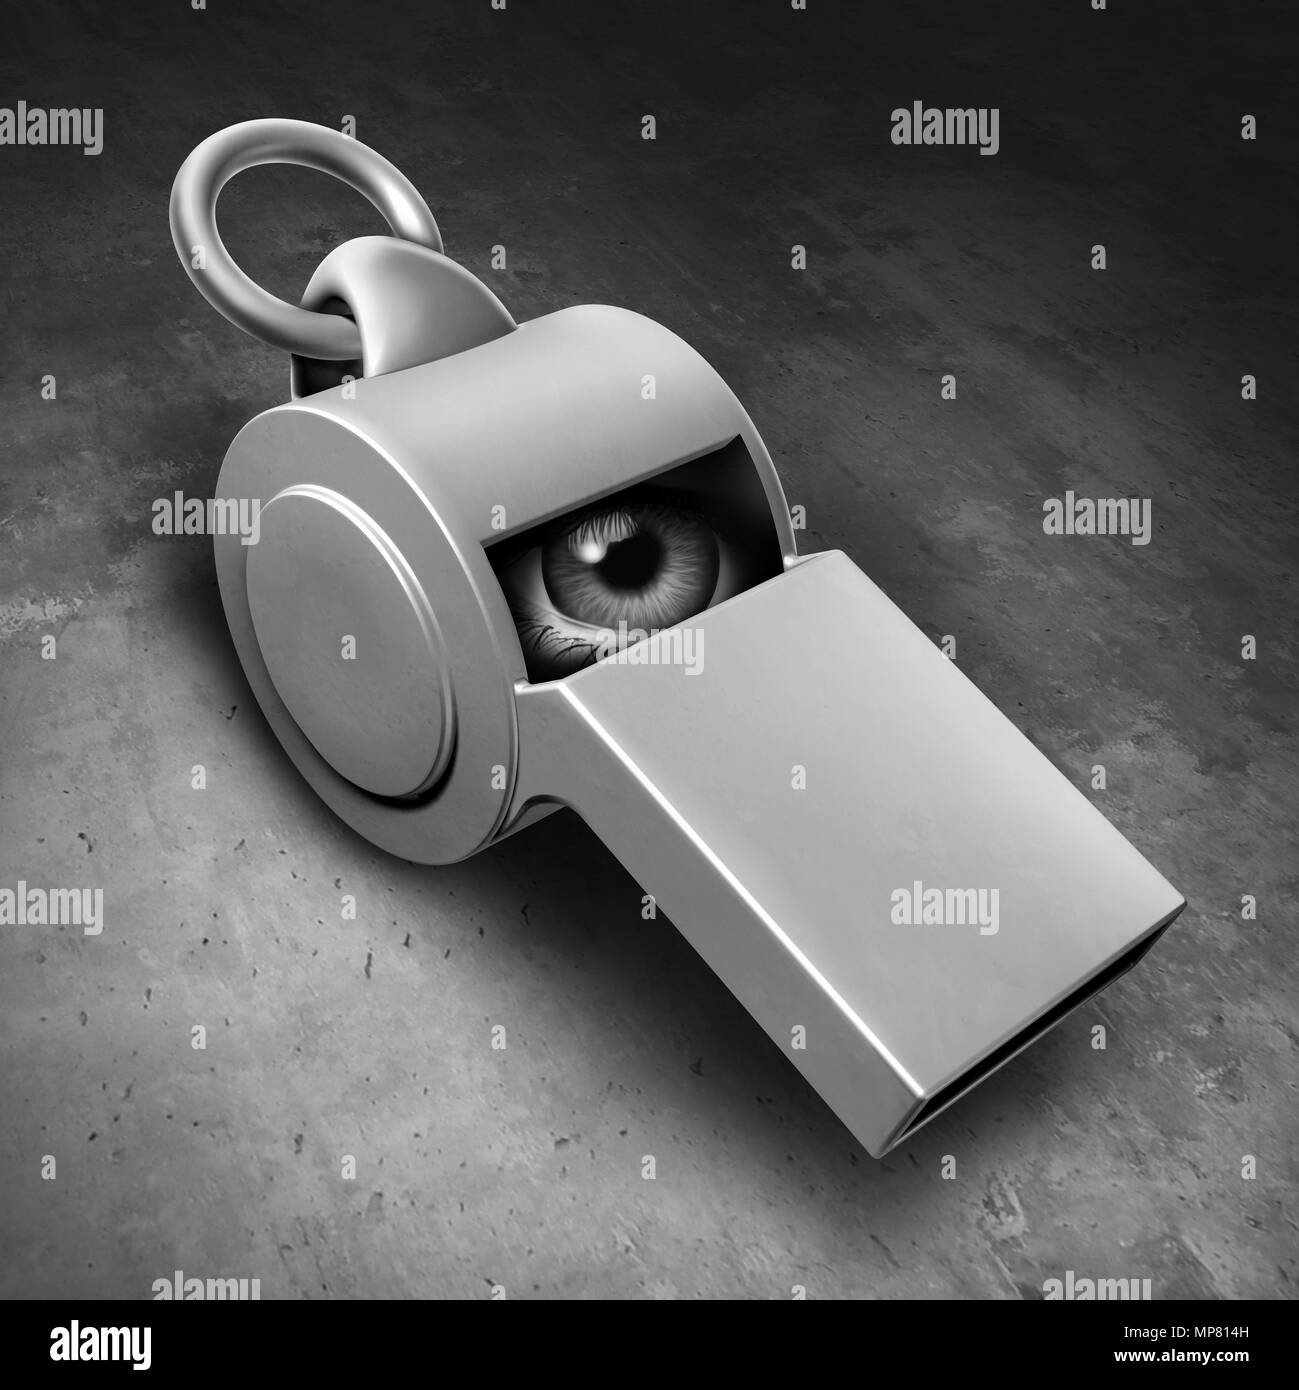 Secret informant as an imbedded spy or hidden whistle blower reporter or leaker of privileged information as a law enforcement symbol. Stock Photo